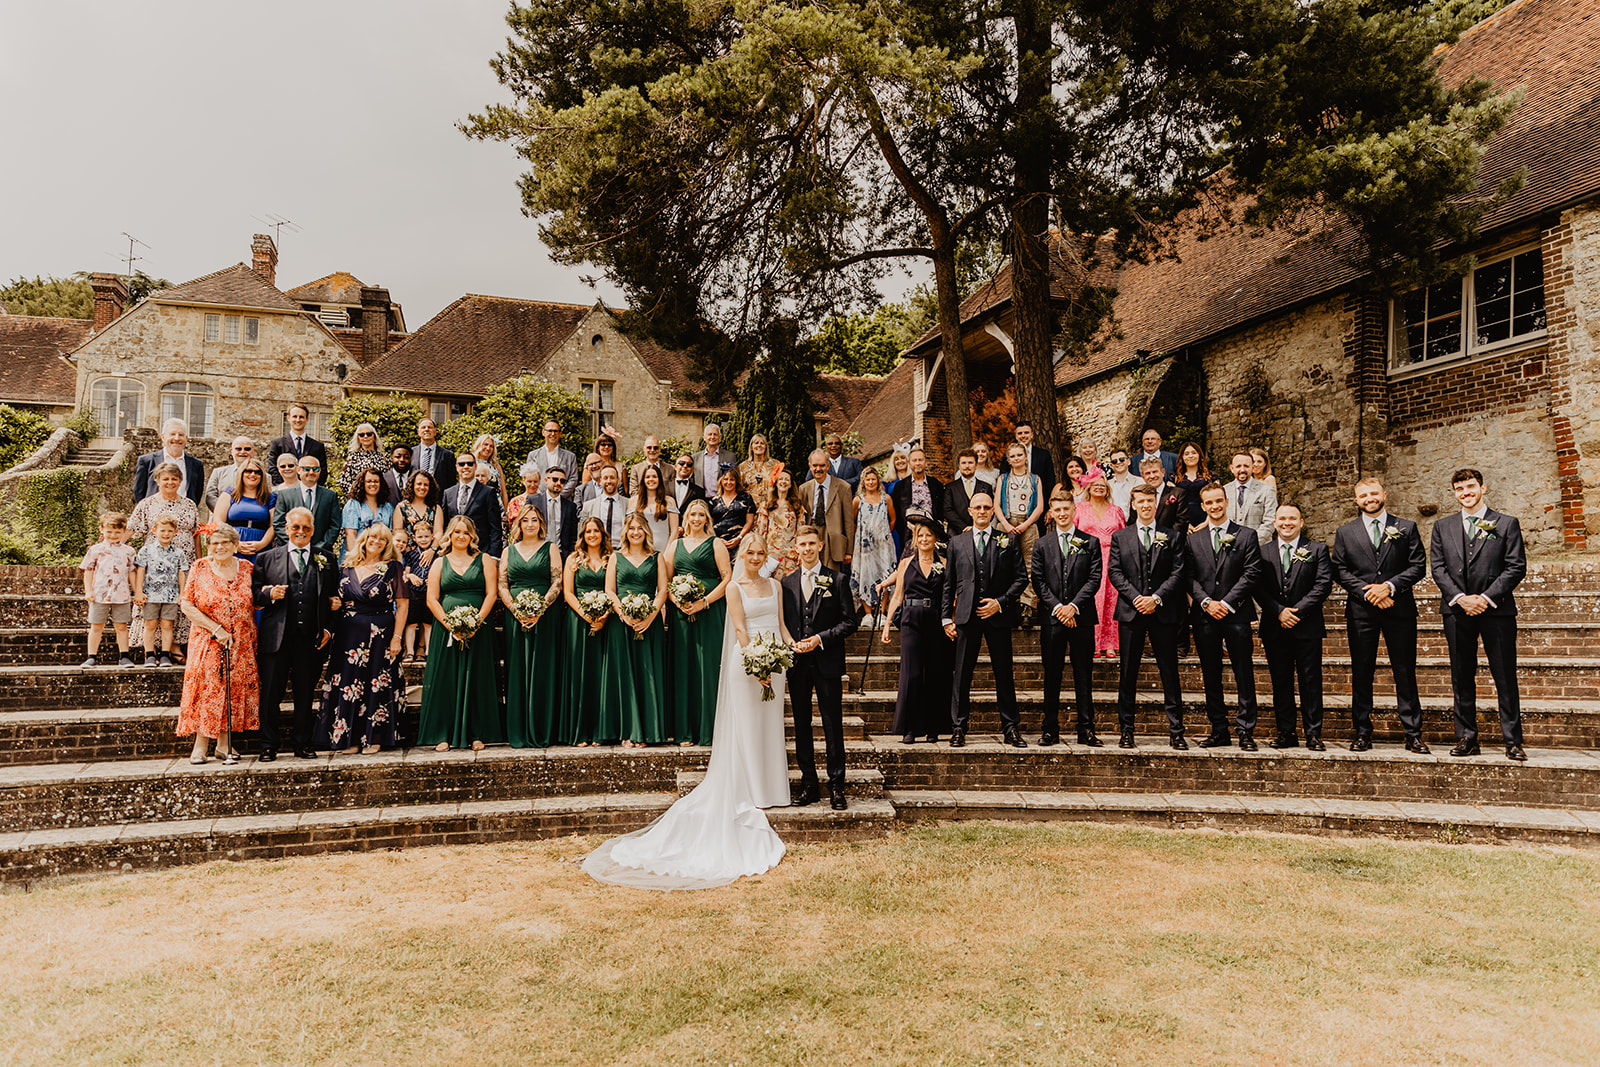 Wedding guests group photo at a Bury Manor Barn Wedding in Sussex. Photographer OliveJoy Photography.